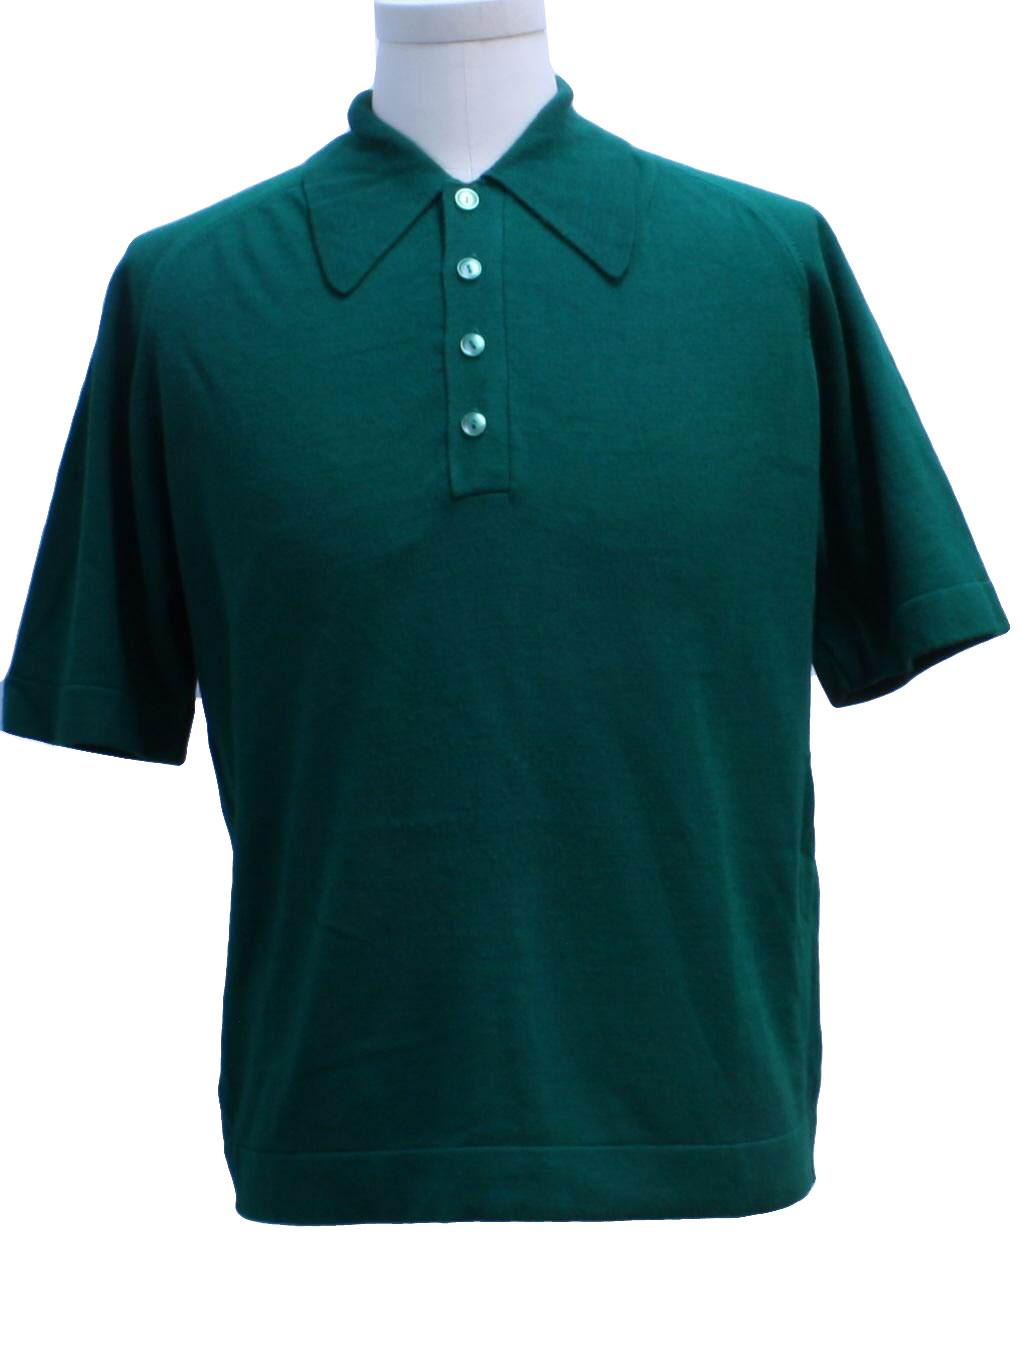 70's Spalding Knit Shirt: 70s -Spalding- Mens green background acrylic ...